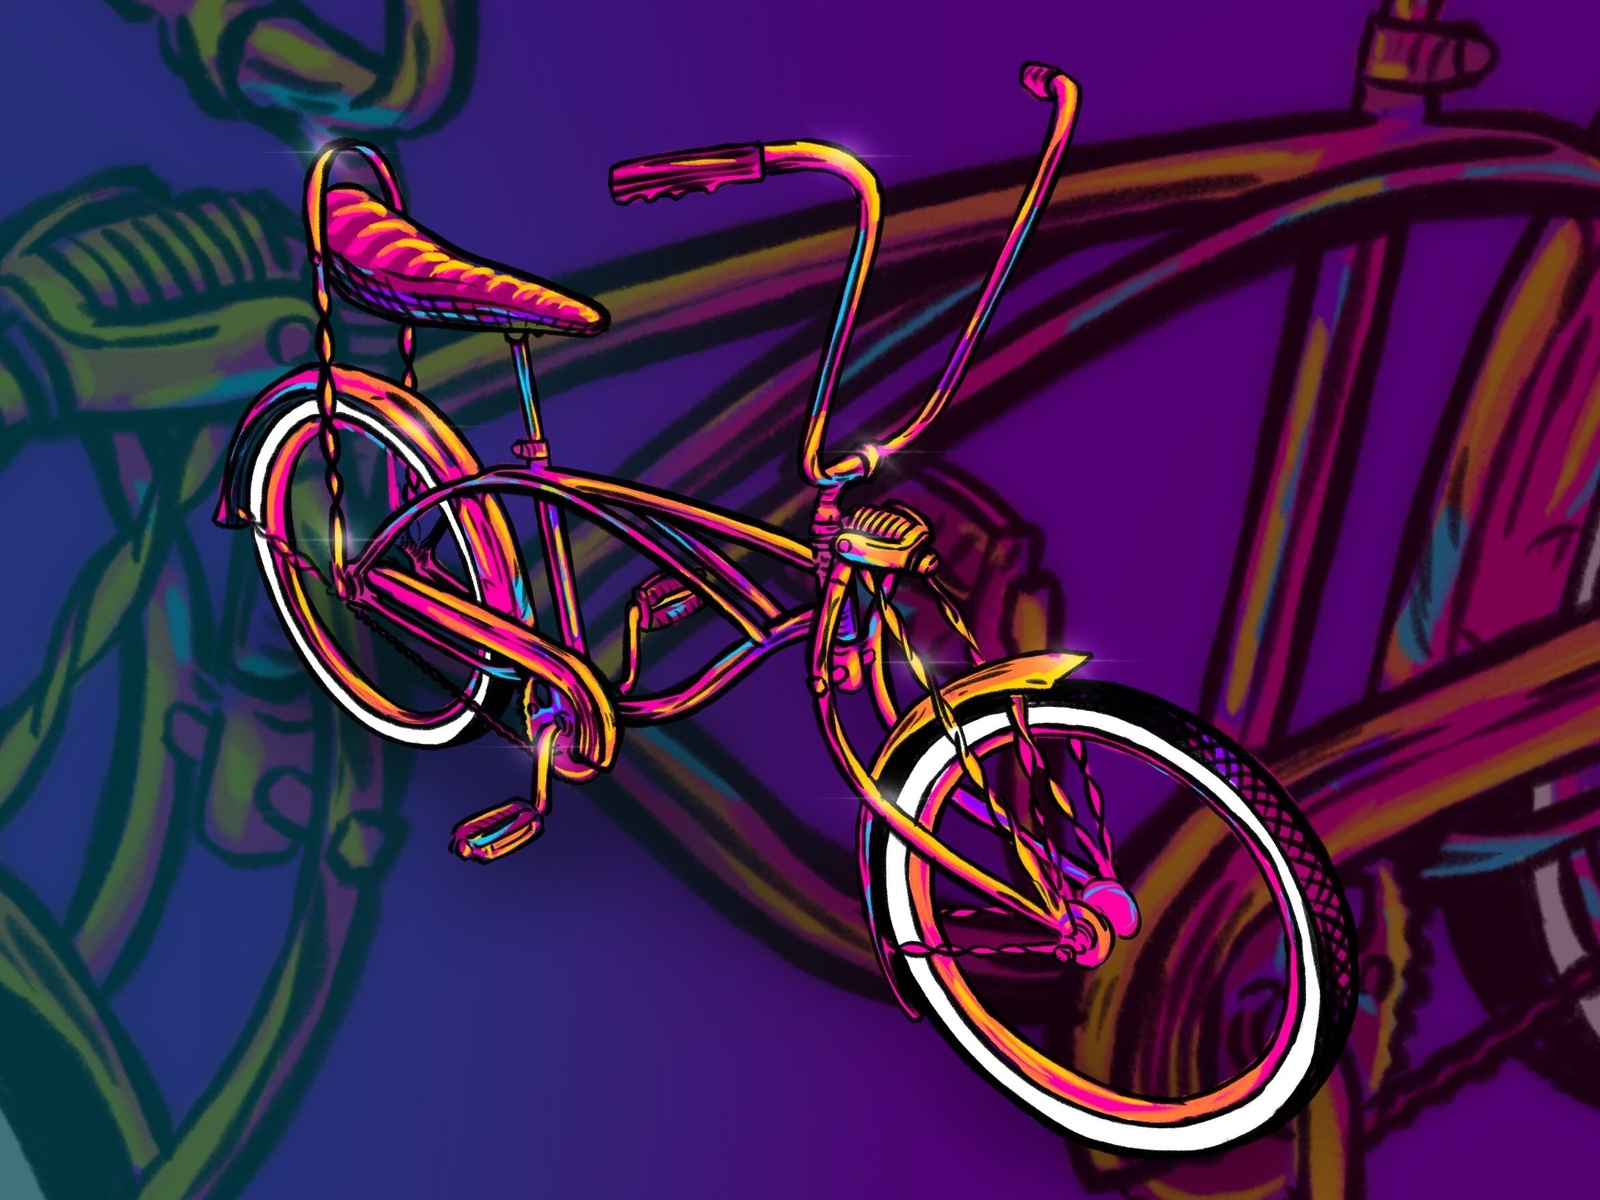 Lowrider Bicycle by Erik Knutson on Dribbble